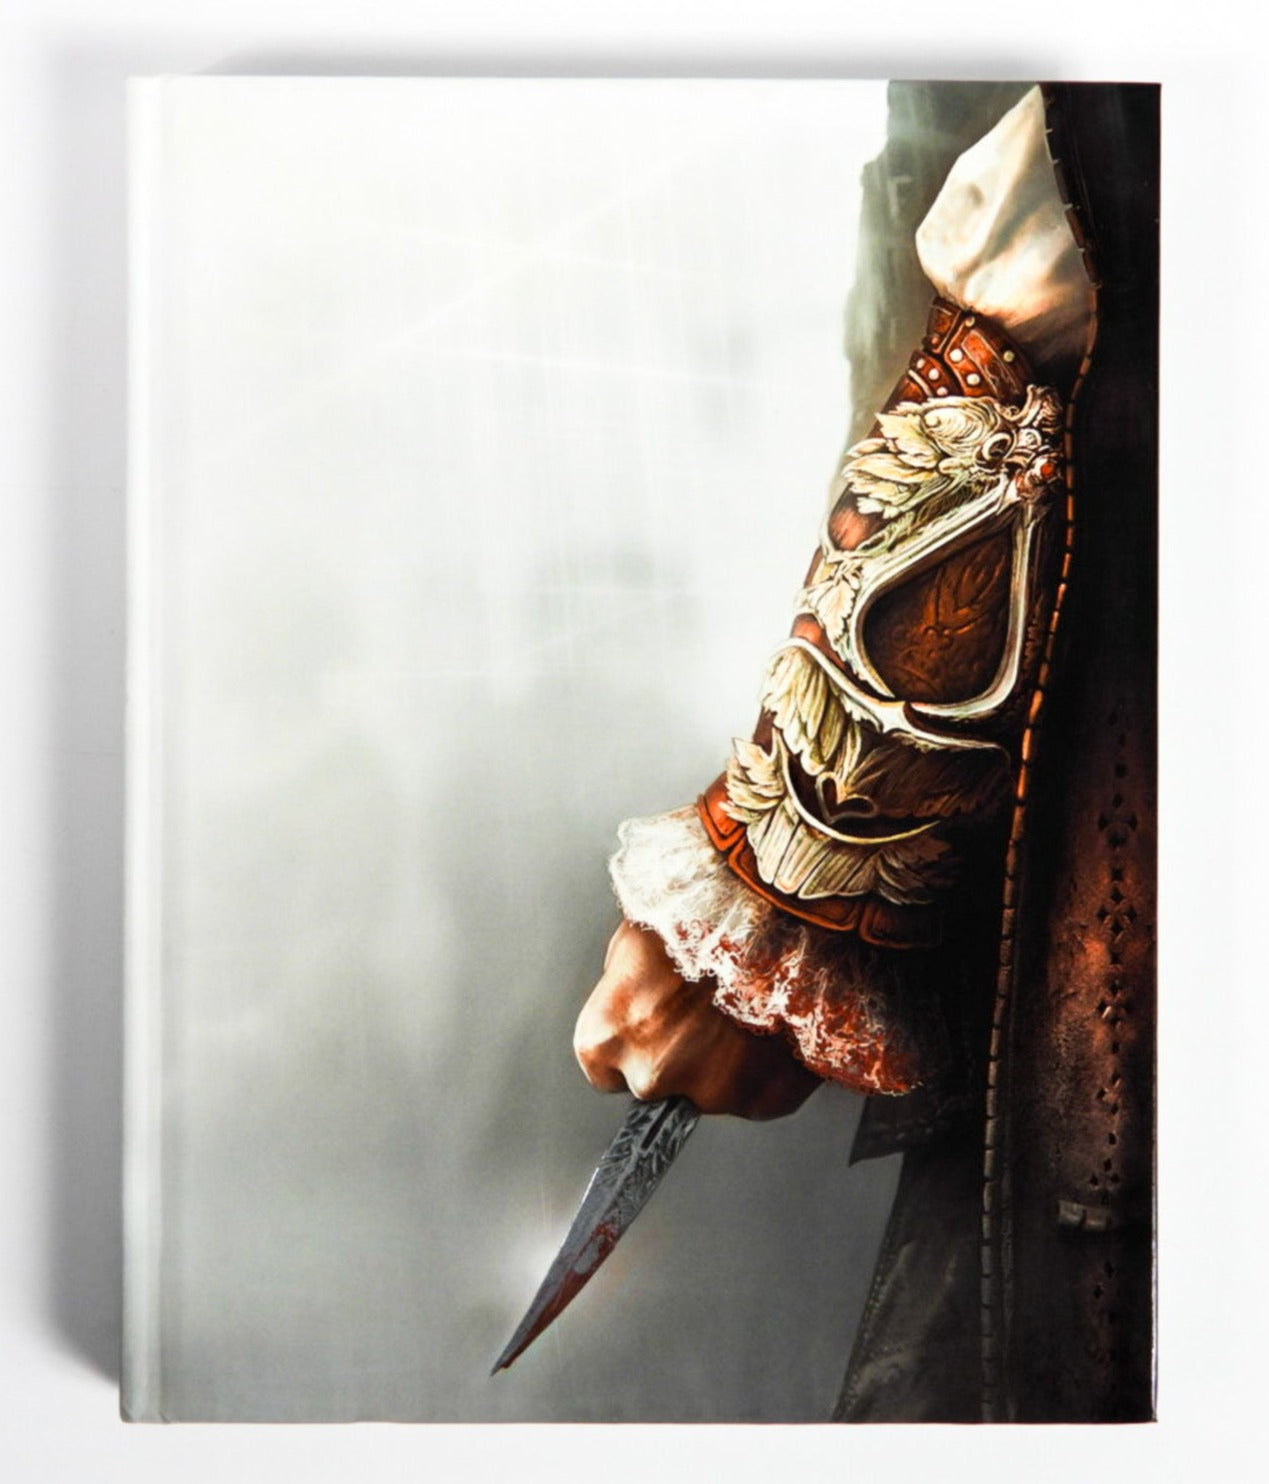 Assassin's Creed II - The Complete Official Guide 